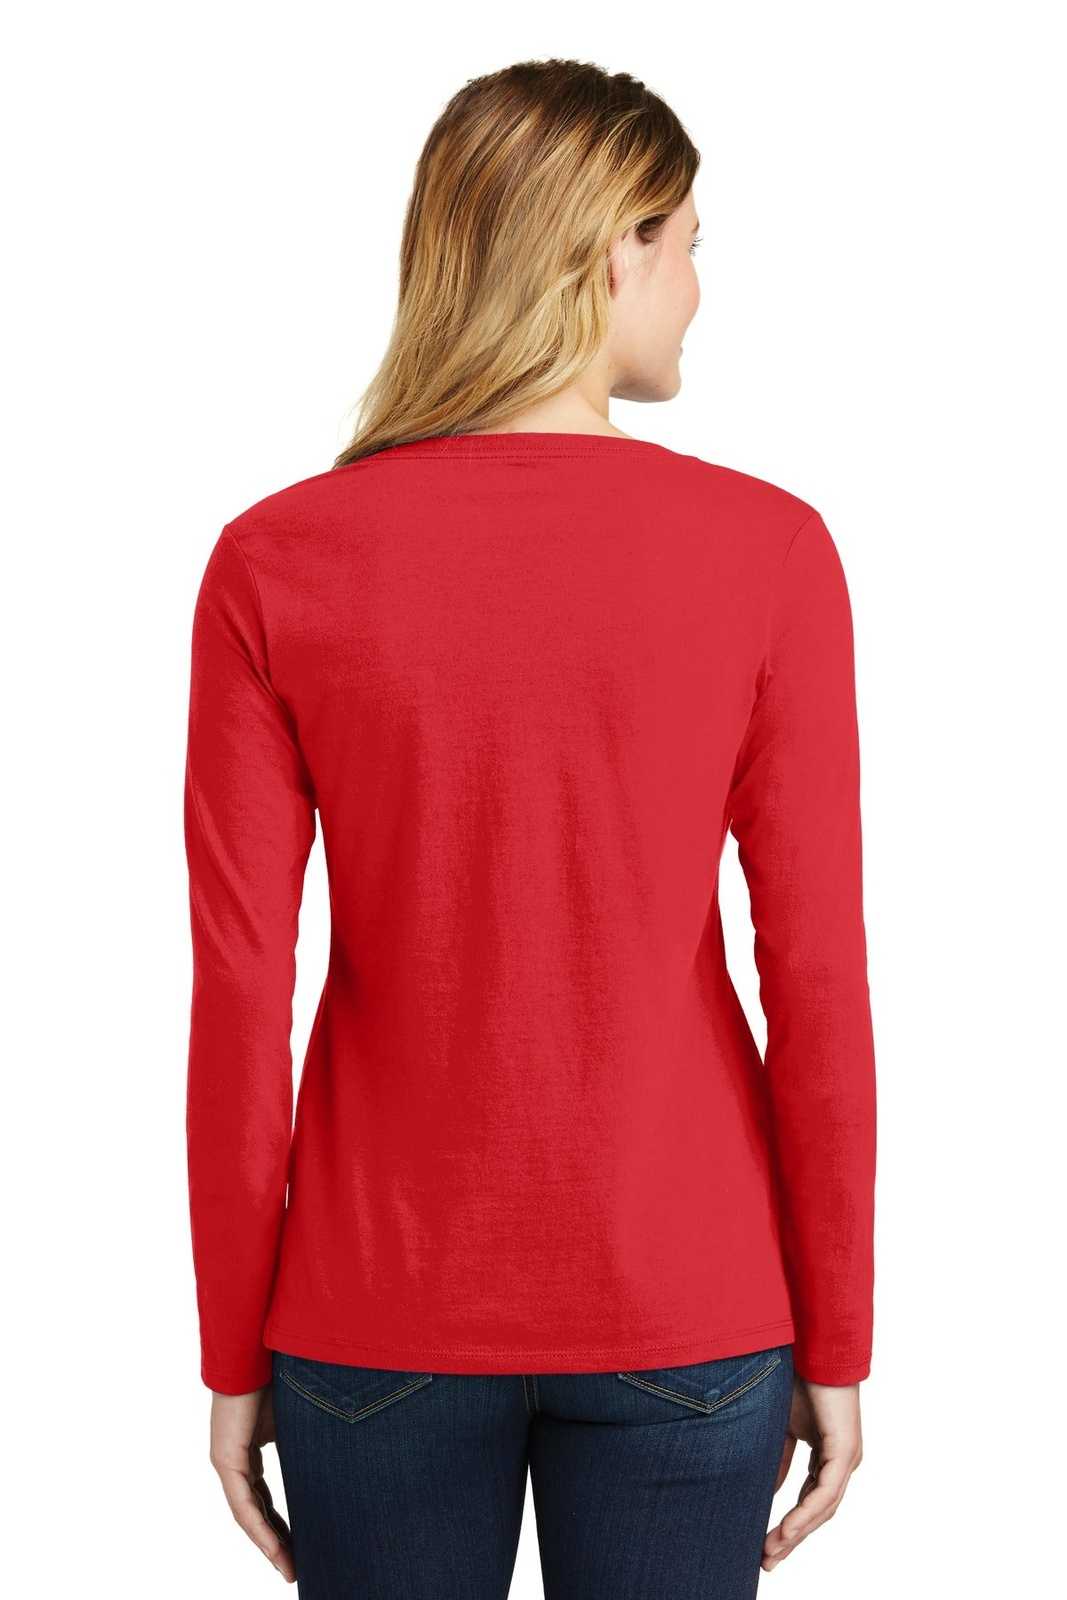 Port &amp; Company LPC450VLS Ladies Long Sleeve Fan Favorite V-Neck Tee - Bright Red - HIT a Double - 2